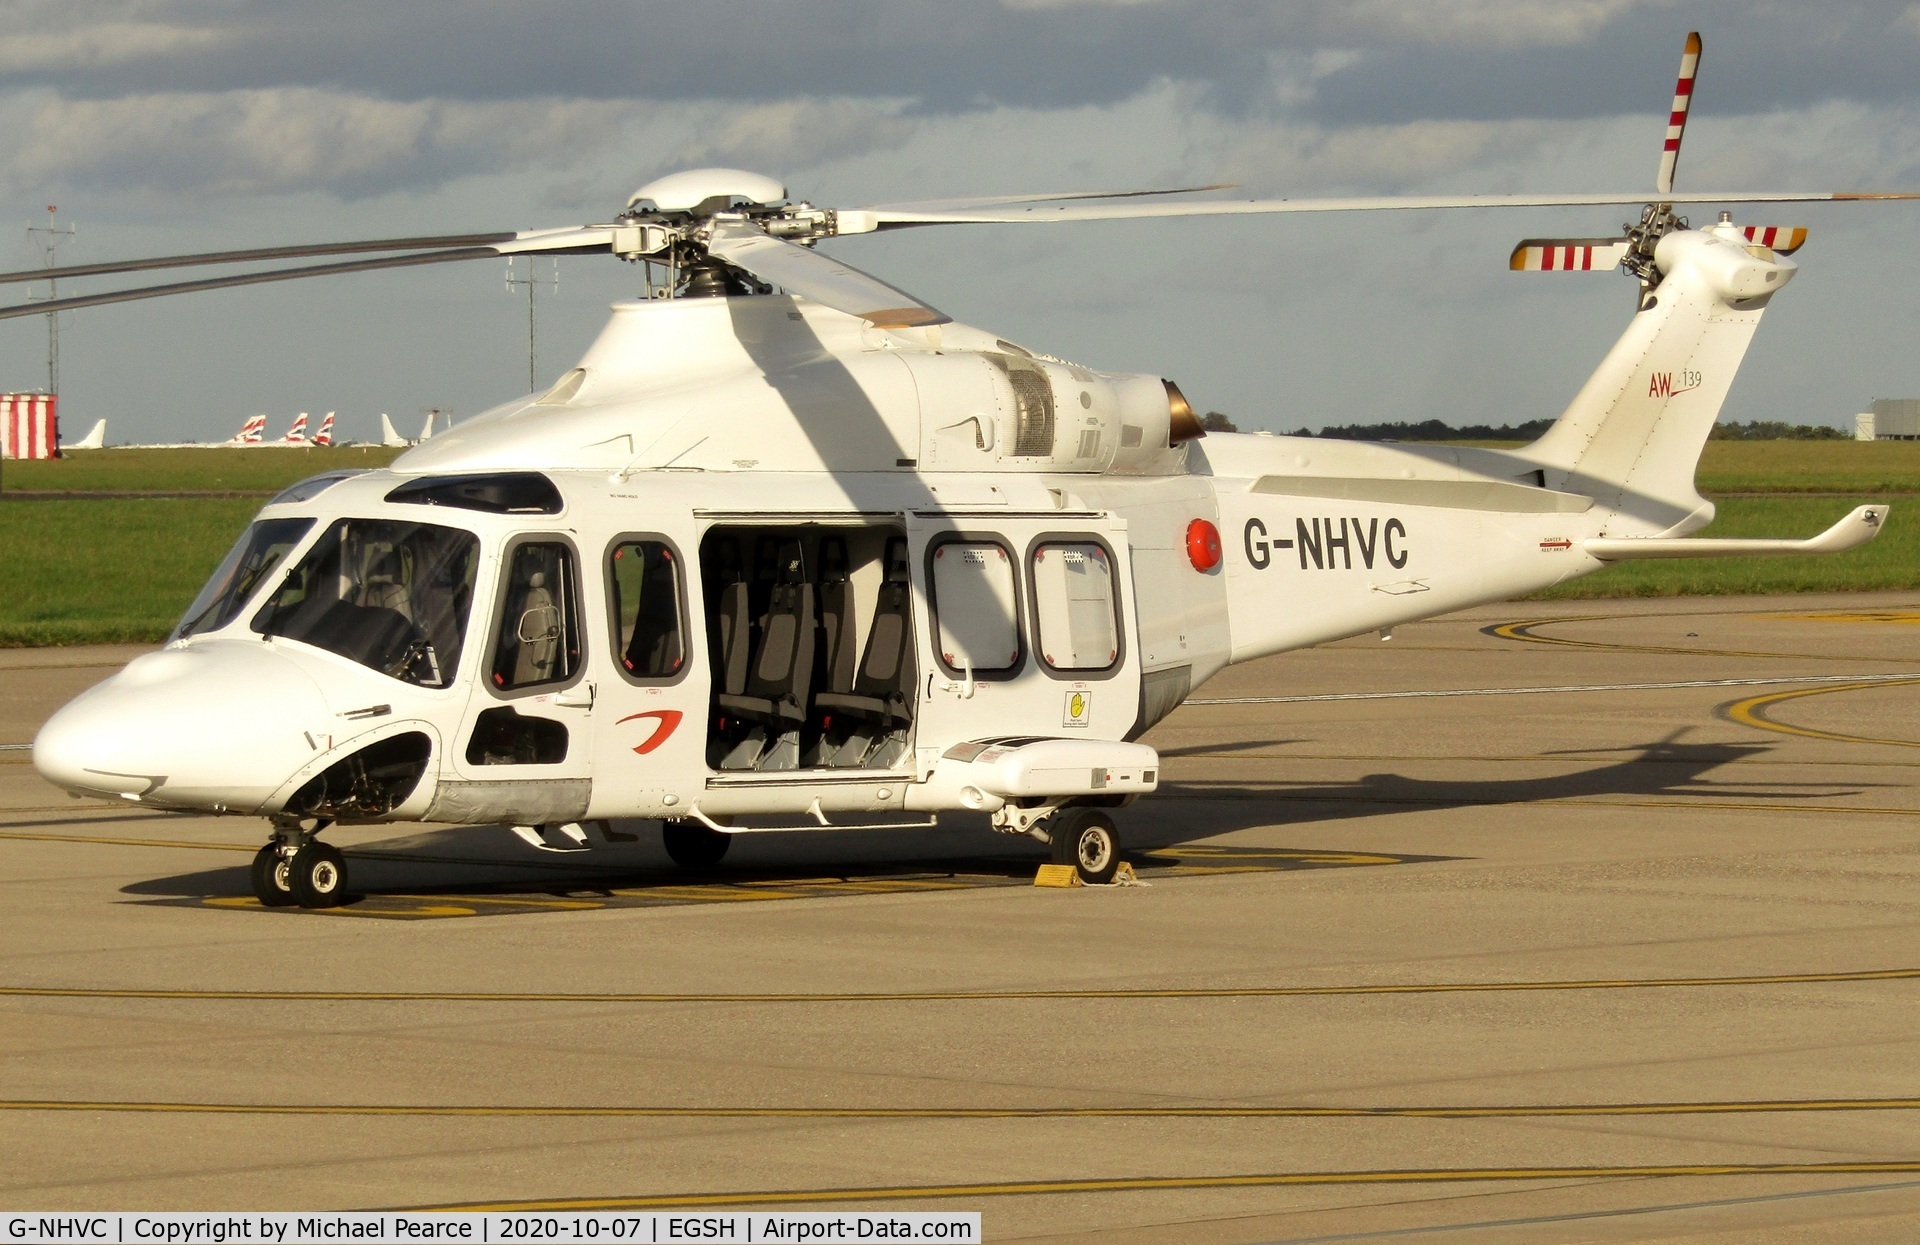 G-NHVC, 2015 AgustaWestland AW-139 C/N 31704, Parked at SaxonAir after completing the day's flights.